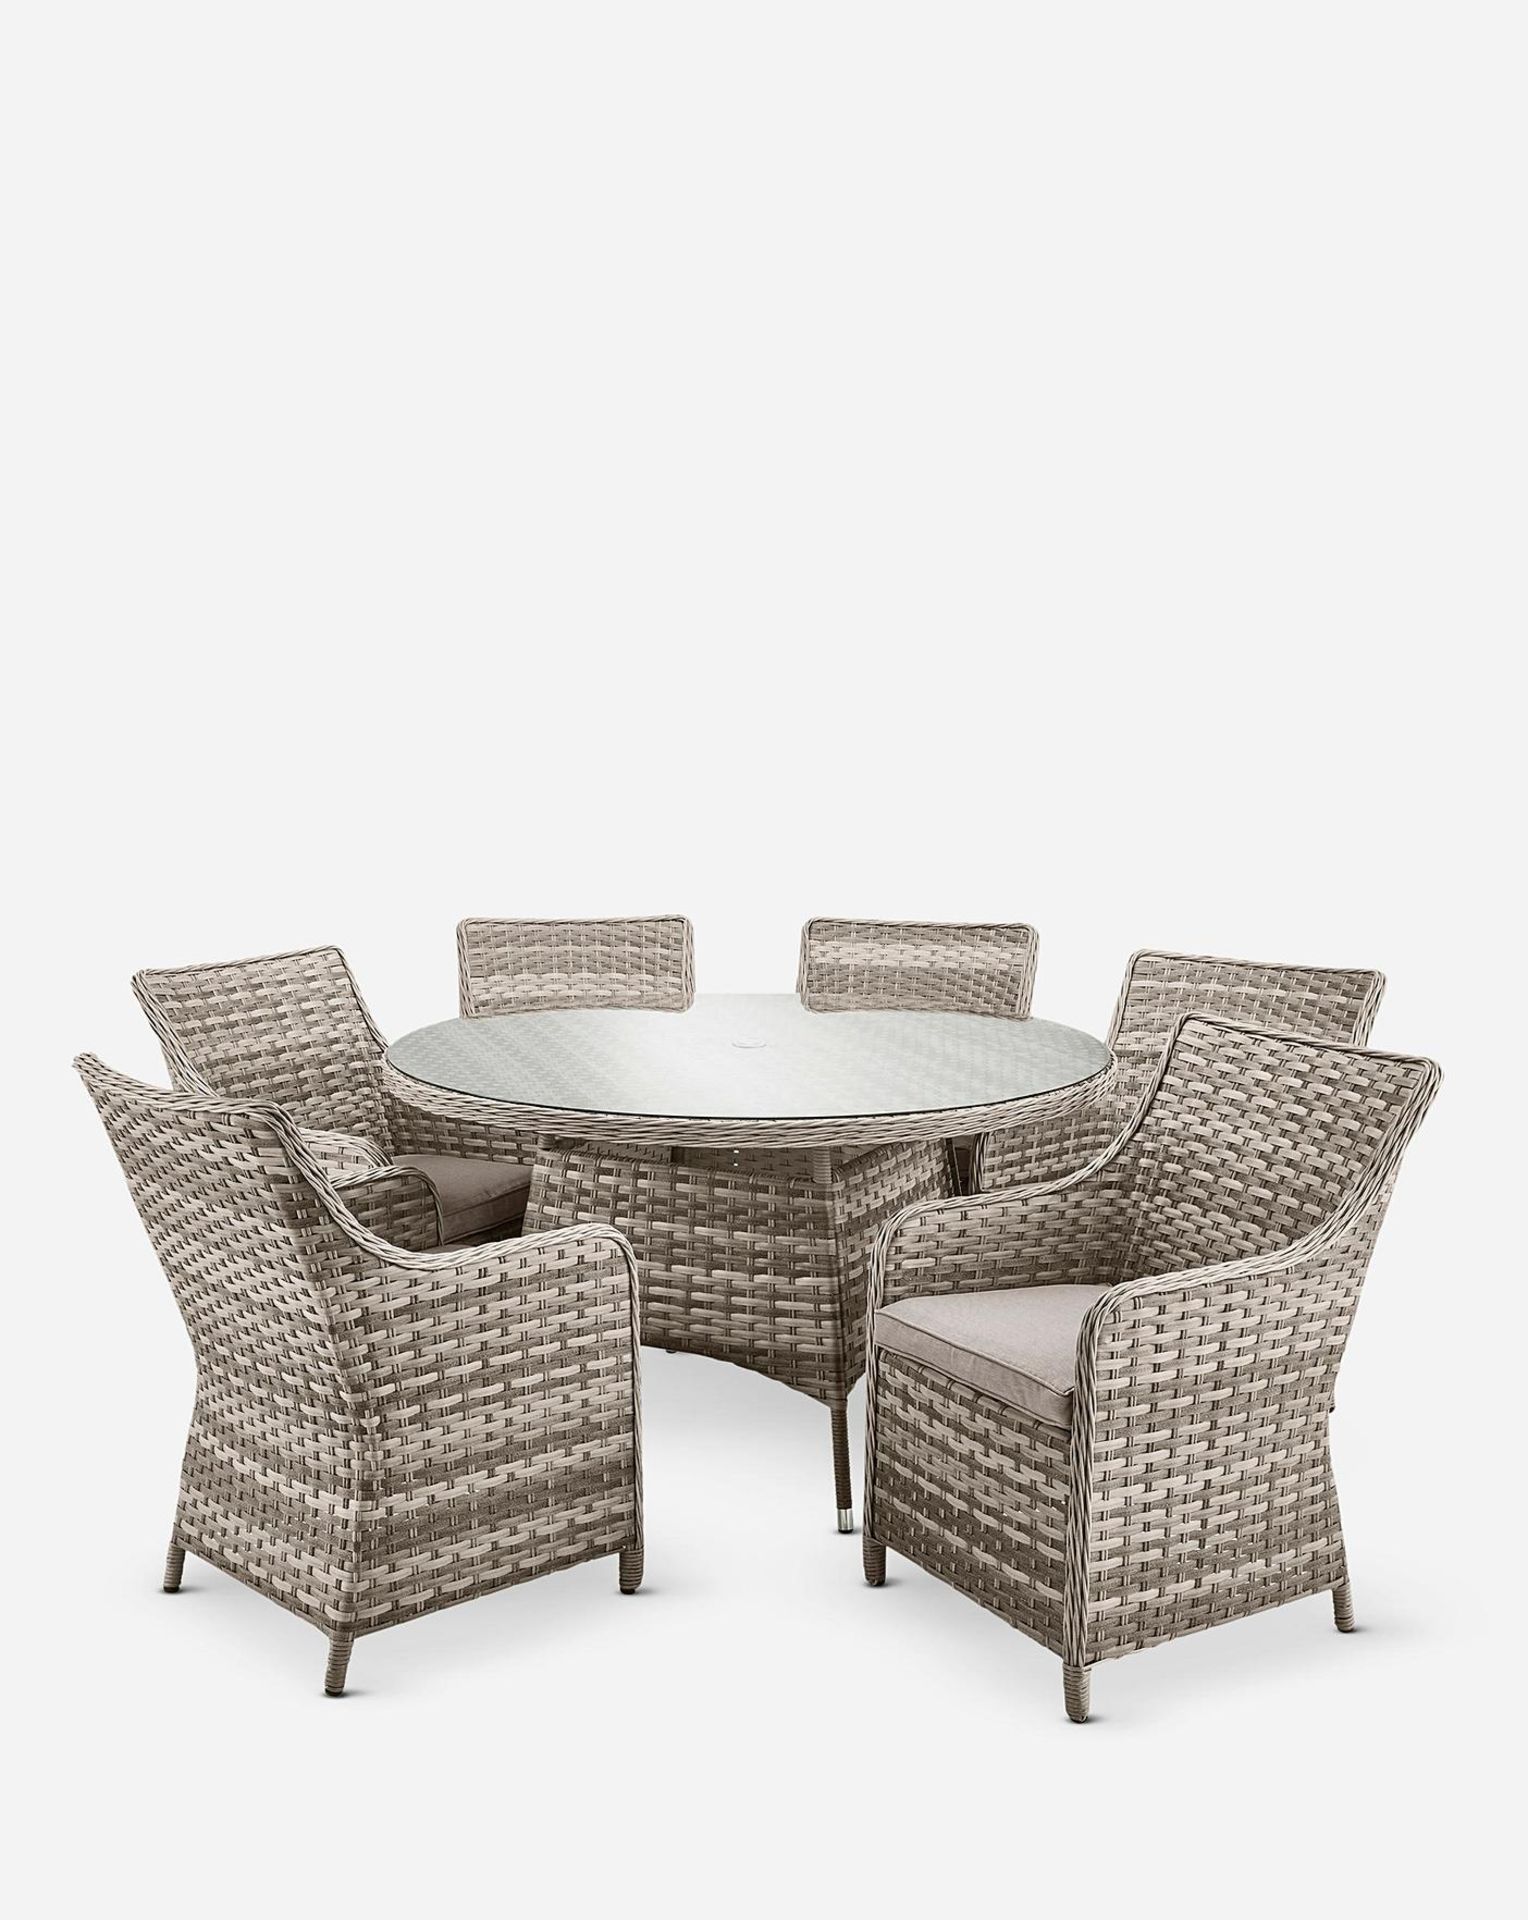 James 6 Seater Dining Set. RRP £1,799. (ROW13A) The James dining set completes with 6 chairs and 1